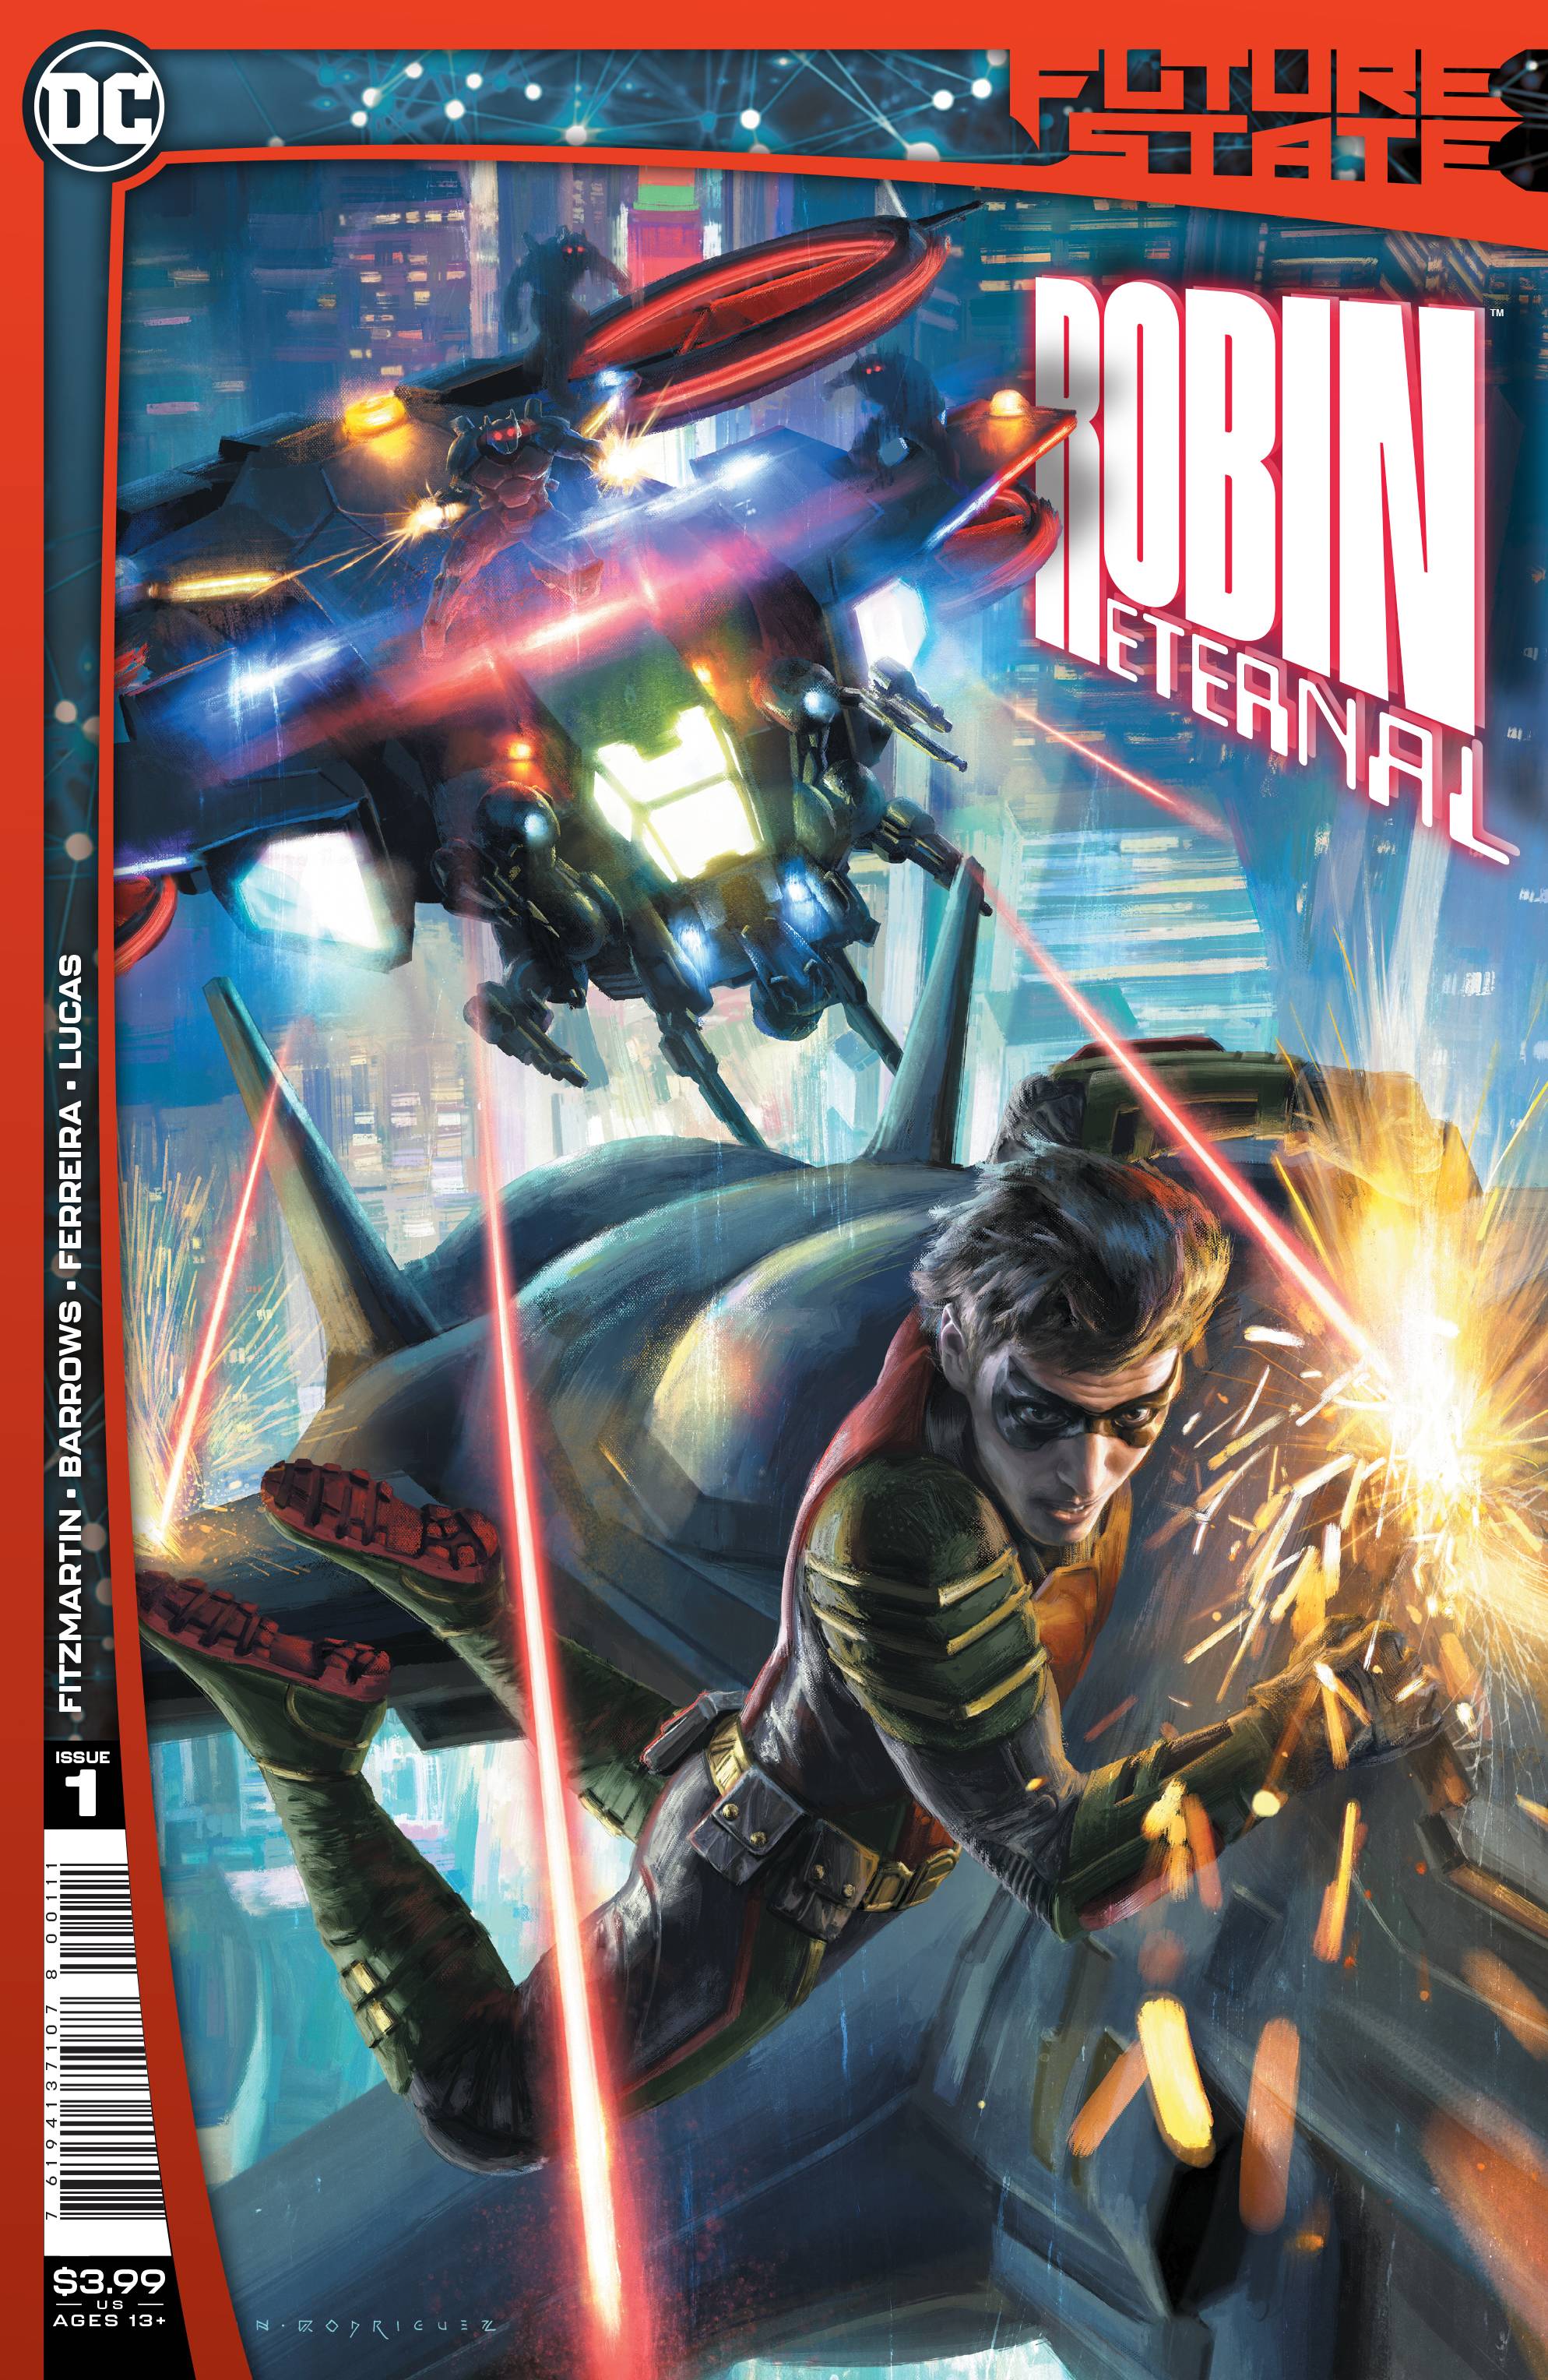 FUTURE STATE ROBIN ETERNAL #1 | L.A. Mood Comics and Games